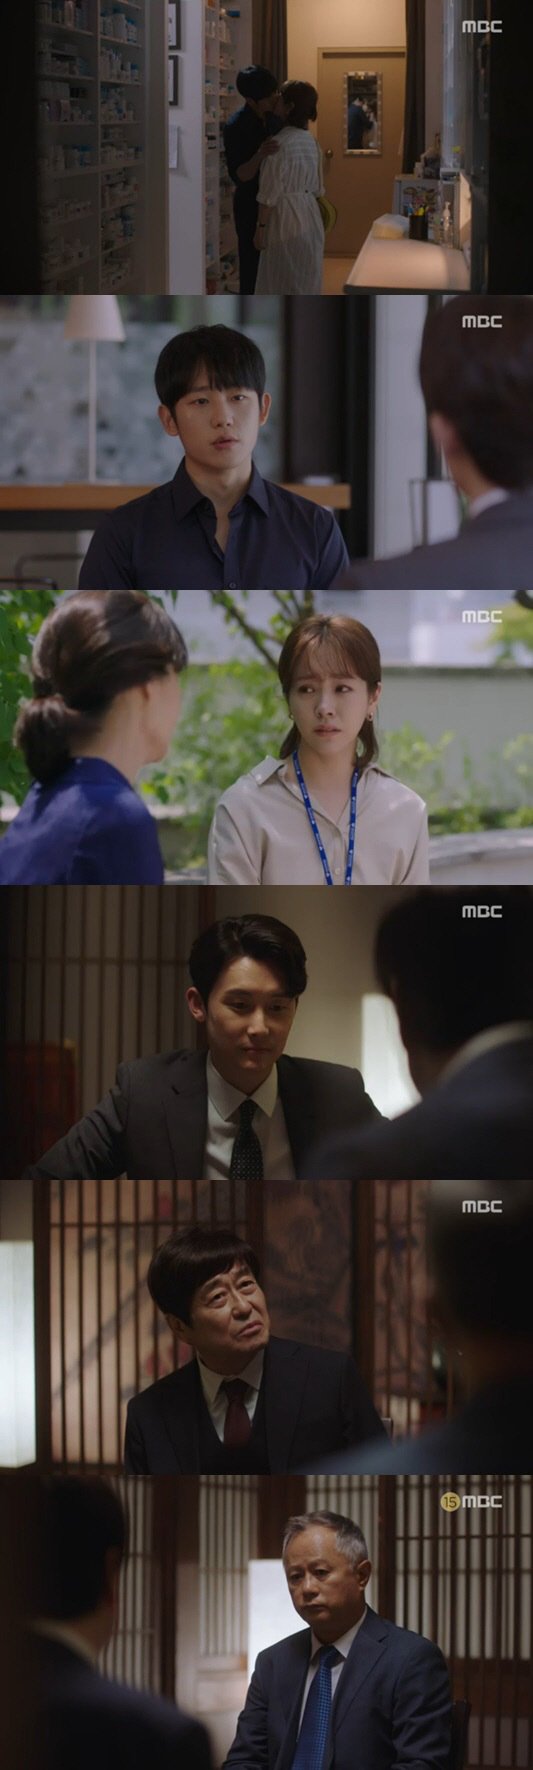 Spring Night Han Ji-min and Jung Hae-in have become more and more secure after overcoming conflicts.In the MBC tree mini series Spring Night broadcast on the 10th, Yoo JiHo (Jeong Hae-in) and Lee Choi Jung-in (Han Ji-min) were shown to have a conflict.The news of his son Jung Eun-woo (Hian), who was always calm and unwavering, revealed his anxiety.Eventually, Yoo JiHo exploded his anxiety toward Choi Jung-in in a drunken mood.Yoo JiHo told Choi Jung-in, Would you abandon Choi Jung-in, too, if you would, its fine now. Can you trust Choi Jung-in?Is there any confidence that it will never change? And Choi Jung-in panicked, Do you believe me now? Do you think I will change?Well talk again tomorrow. But Yoo JiHo said, I can not answer ... I see. Lee Choi Jung-in hurriedly left Yoo JiHos house, and Friend Park Young-jae (Lee Chang-hoon) of Yoo JiHo chased Lee Choi Jung-in and said, Please understand JiHo.The fact is that Jung Eun-woo mom..., she tried to comment on Jung Eun-woos biological mother, but Lee Jung-in said, Dont tell me.I dont want to hear it, he said, avoiding his position.This Choi Jung-in was confused by the sudden attitude of Yoo JiHo.At this time, Kwon Gi-seok (Kim Joon) was drunk in front of Choi Jung-ins house and was waiting for Choi Jung-in.Lee Choi Jung-in said, Can I meet again? I betrayed once, but can I meet again? Can I believe it? What do you think?Kwon Ki-seok replied, I can believe it.The next day, Yoo JiHo, who woke up from alcohol, was frustrated when he realized what he had said to Lee Jung-in.Lee Choi Jung-in also told Friend, I think I was too out of sight.Lee Choi Jung-in and Yoo JiHo met again and confided in their hearts.Yoo JiHo said, I was so drunk that I really thought of Choi Jung-in. Im so sorry, I never thought of that for a moment.I just did not know that my anxiety came out. Lee Choi Jung-in said, Mr. JiHo asked me if I would throw it away. I felt like, Isnt this Choi Jung-in the same?I never thought that Mr. JiHos wound would have healed without traces of time.I know that JiHo does not believe me at all, but I know it is uncomfortable. I thought if I loved Mr. JiHo, everything could be covered up, but Mr. JiHos past was so strong that it was so popping out.I still have a little bit of time to think about myself, Yoo JiHo said, I will say it again to the man mind, do not abandon us. Shin Hyung-sun (Gil Hae-yeon), who accidentally encountered Yoo JiHos mother, told Lee Choi Jung-in, I know youve been suffering a lot. What is more important than youre happy?But marriage is no joke: a moment of regret can come. Its not over because my mother let me, she said, allowing her to marry Yoo JiHo.But Choi Jung-in and Yoo JiHo had a cooler.Lee Choi Jung-in did not meet Yoo JiHo, saying, I need time to think about it, and Yoo JiHo waited for Lee Choi Jung-in to contact me.At this time, Yoo JiHo was angry when he realized that Kwon Ki-seok knew that he had a relationship with Choi Jung-in.Yoo JiHo went to Kwon Ki-seok and said, Did not you tell me not to touch Lee Jung-in?How will this Choi Jung-in life be completely gone? Kwon Ki-seok replied, If you give up, I will be willing to give up. Then Yoo JiHo asked, If I give up, do you think I can meet Choi Jung-in again? Kwon Ki-seok said, Who meets? My goal is Yoo JiHo.Of course, there is nothing to be denied if Choi Jung-in comes back. Choi Jung-in is not satisfied with his heart. You cant.Your cheap romance does not fit in this Choi Jung-in or more. Yoo JiHo said, I do not want to talk about it now, it is a threat.What about me and my son, Illegal? Im sorry to see Choi Jung-in. I didnt fall for it.I dared touch my child, but I am not afraid. Kwon then made a promise to Lee Choi Jung-ins father, Lee Tae-hak (Song Seung-hwan), by saying, I and Choi Jung-in should set a date for marriage.Kwon Ki-seok, however, also called his father Kwon Young-guk (Kim Chang-wan), who tried to undoubtedly pursue marriage with Choi Jung-in by using his parents.At that time, Choi Jung-in visited Yoo JiHo, and shared a kiss of reconciliation between the two.